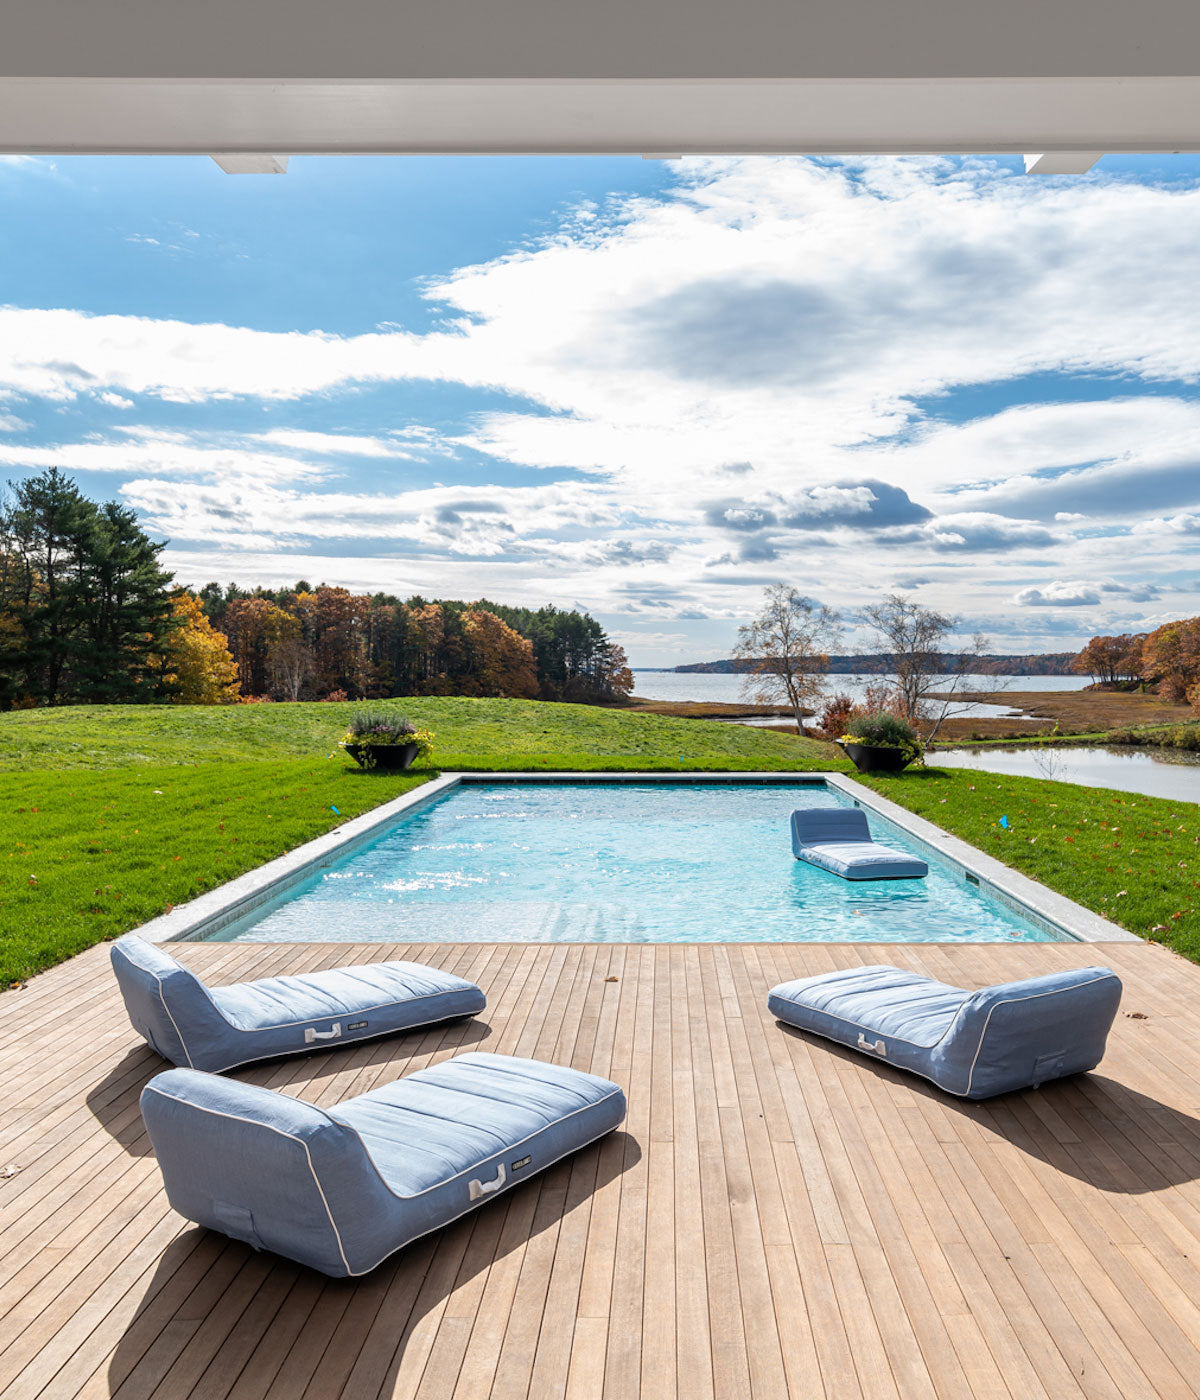 Four luxury pool floats on a wooden deck and floating inside a swimming pool with a background of rolling hills and lakes.